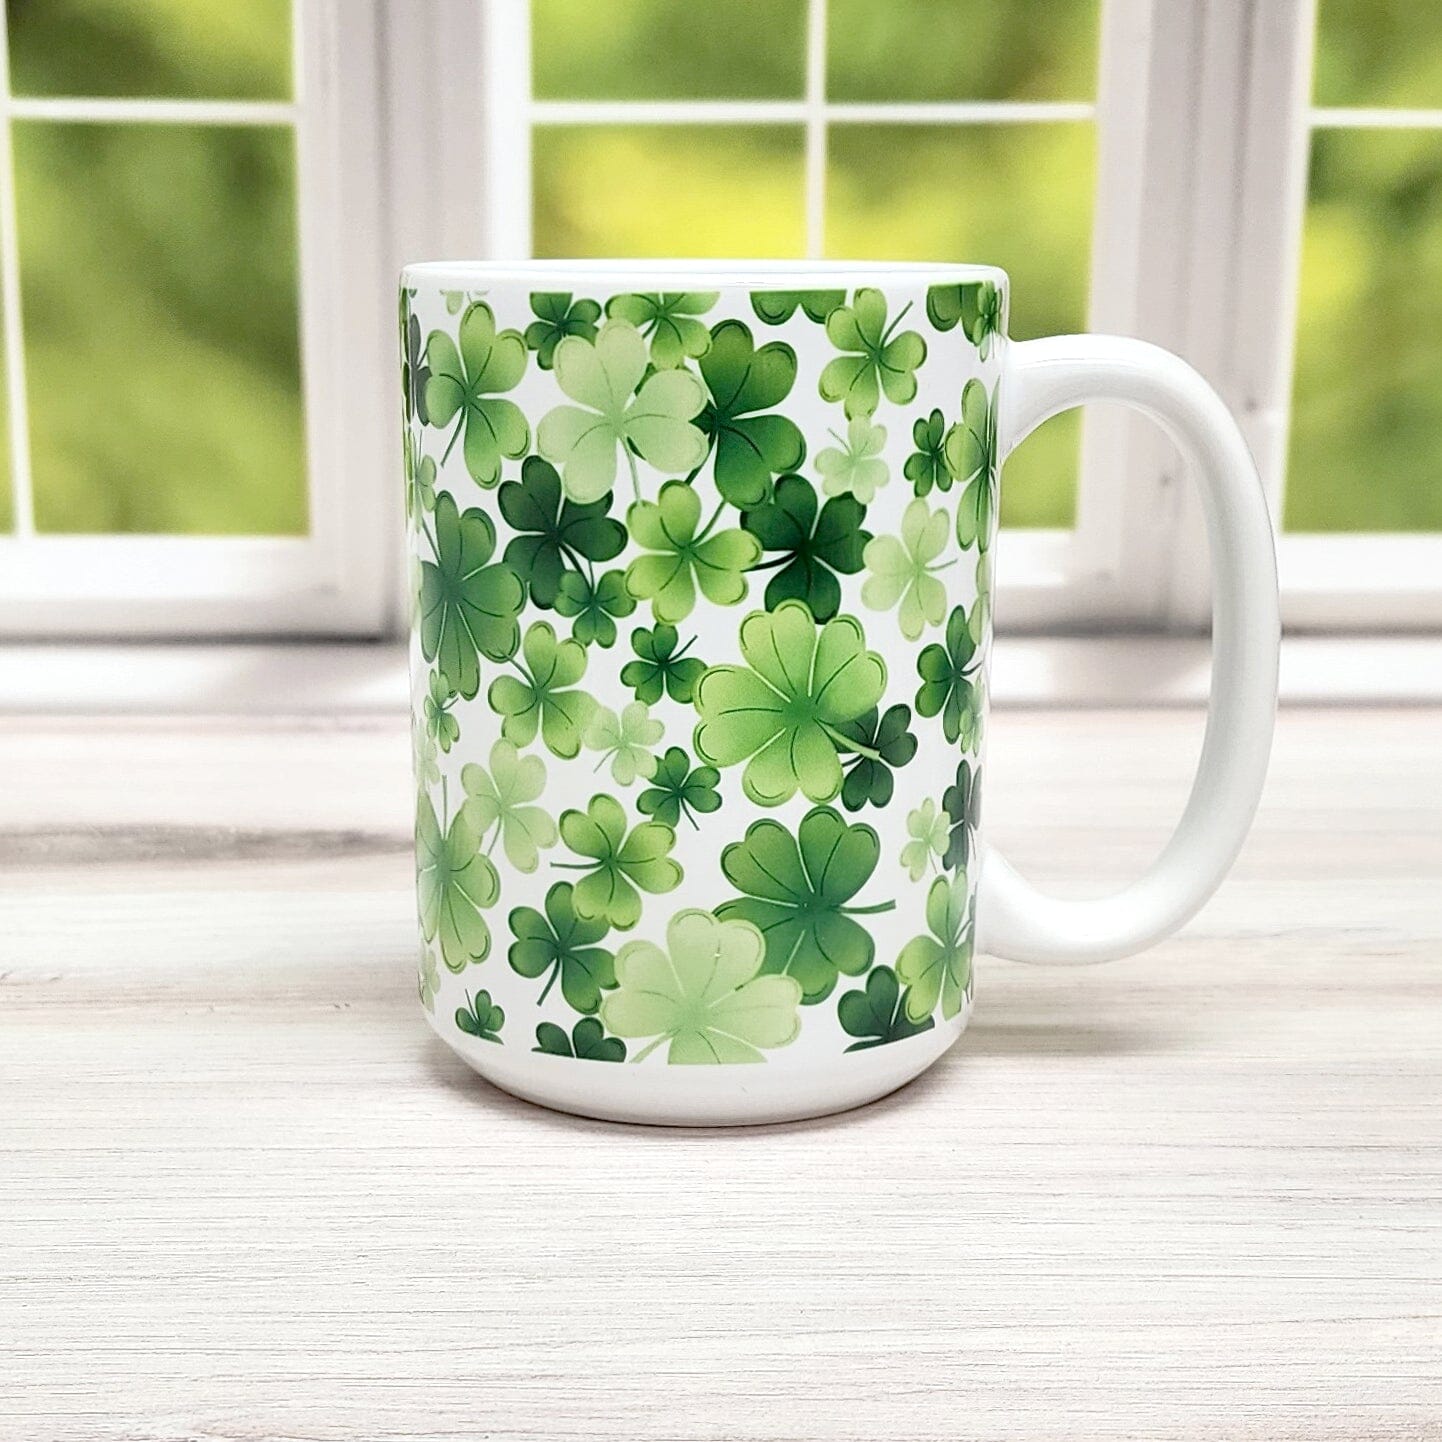 Shamrocks and 4-Leaf Clovers Mug in front of spring window view - 15oz - Amy's Coffee Mugs